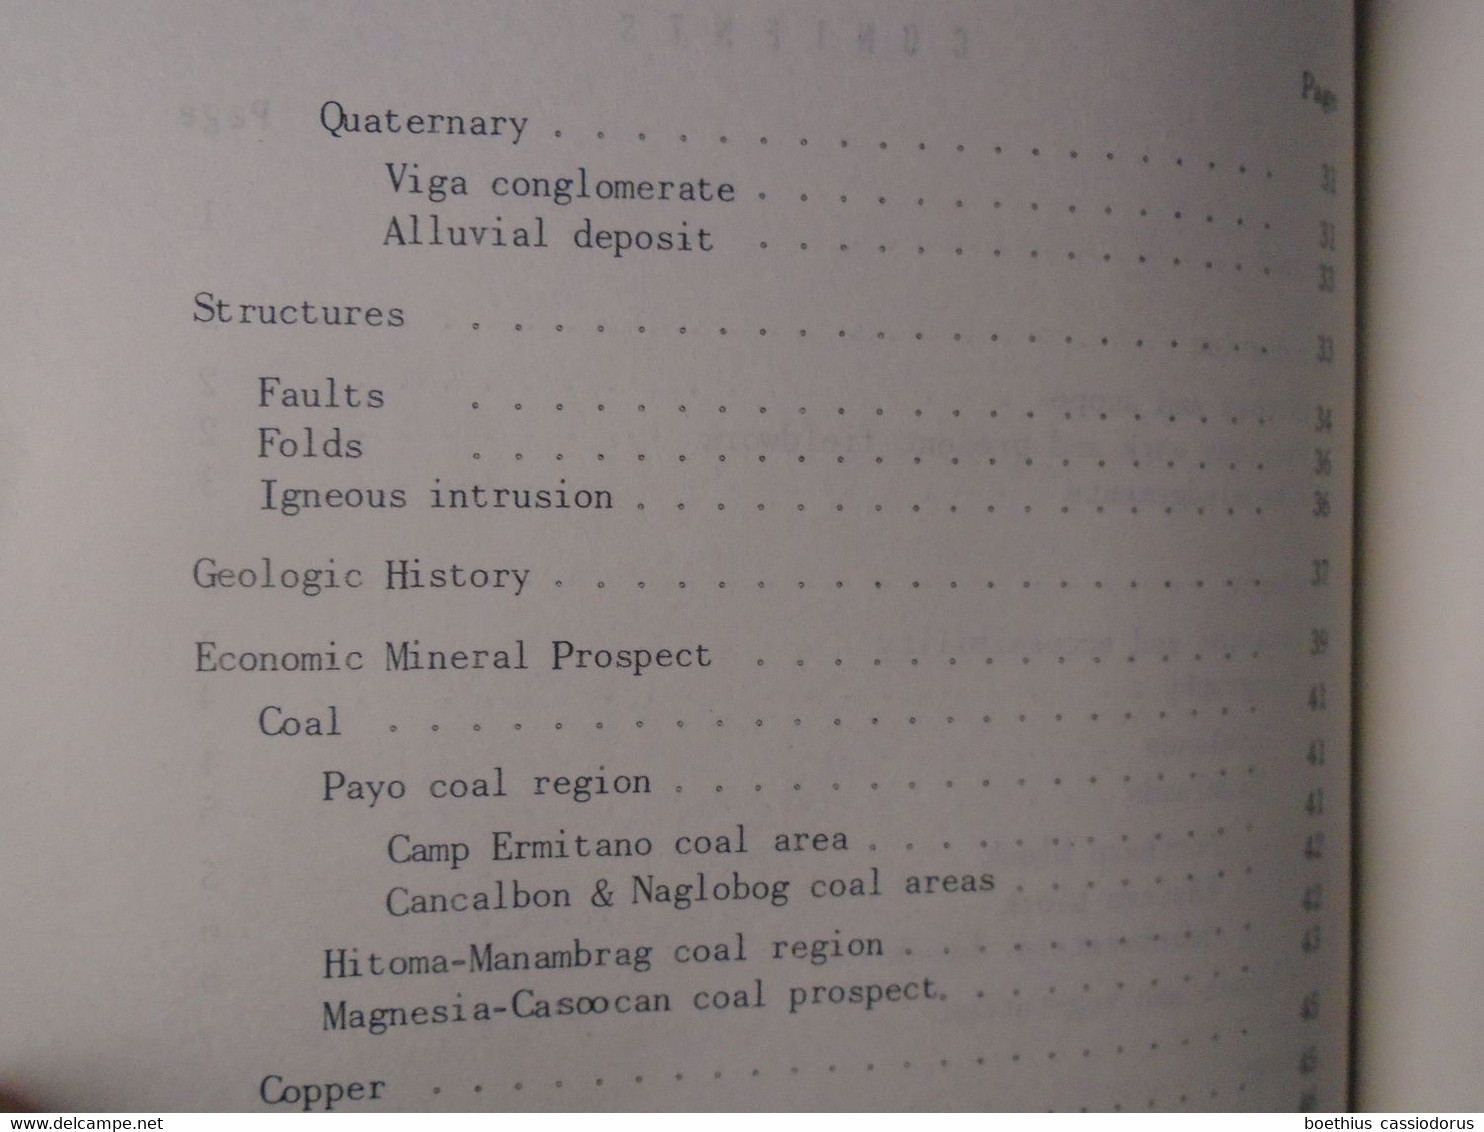 THE GEOLOGY AND MINERAL RESOURCES OF CATANDUANES PROVINCE BY FEDERICO E. MIRANDA & BASSANIO S. VARGAS 1967 PHILIPPINES - Earth Science